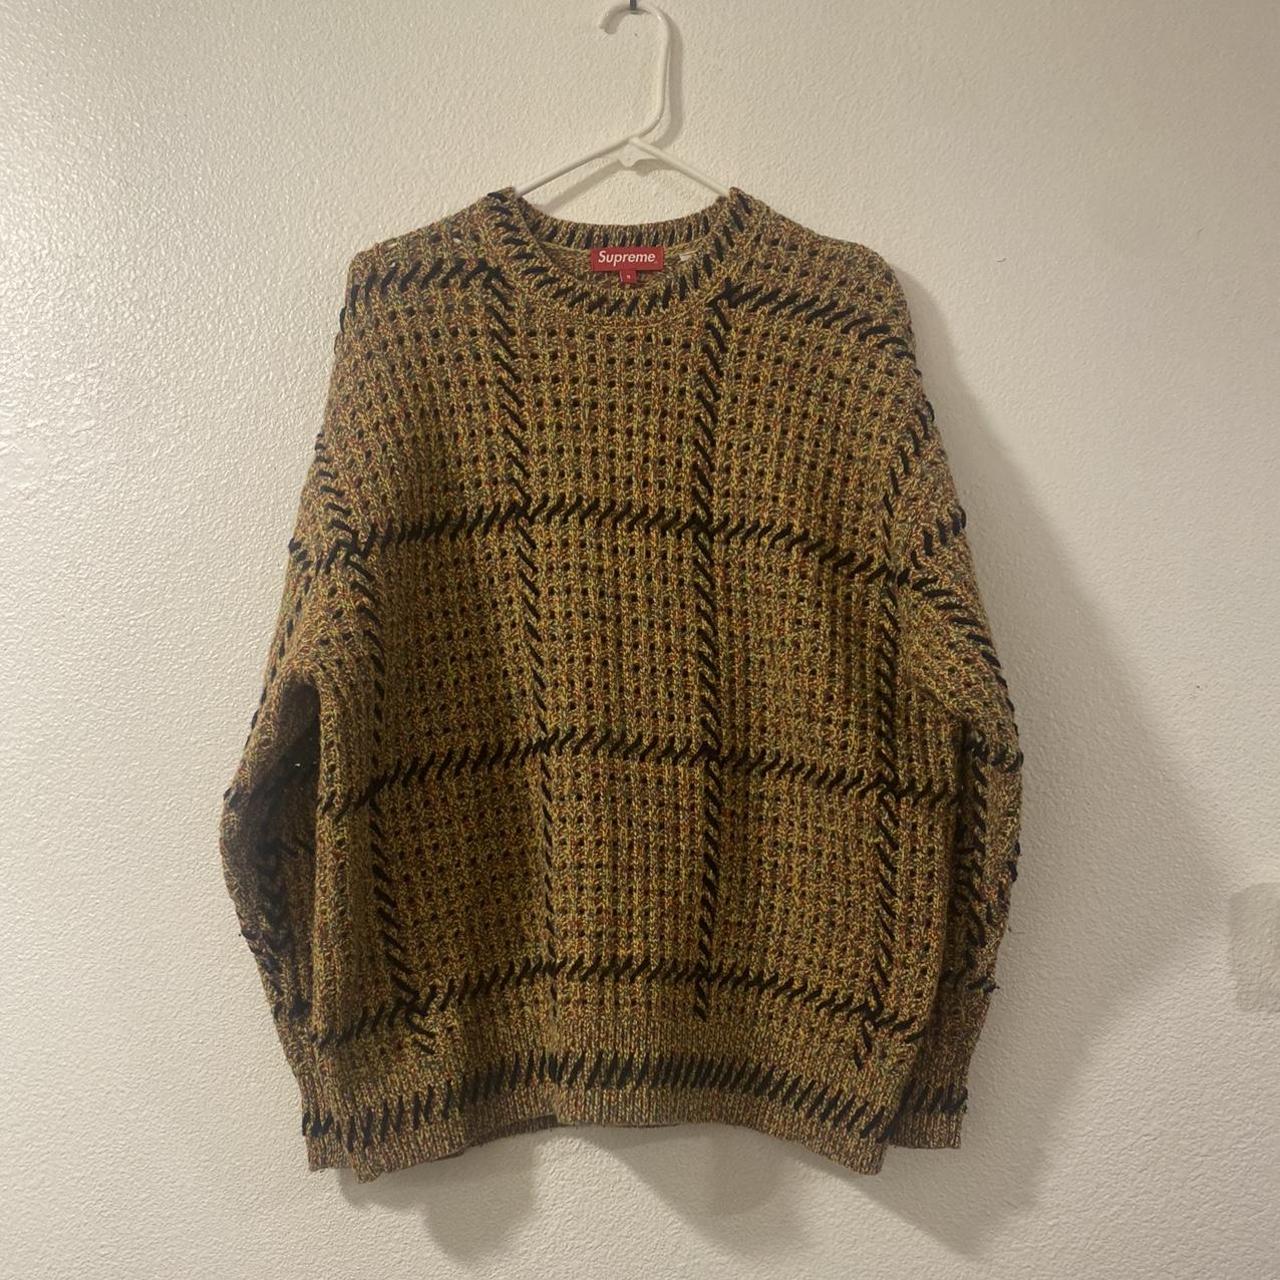 Supreme Quilt Stitch Sweater yellow only wore once...